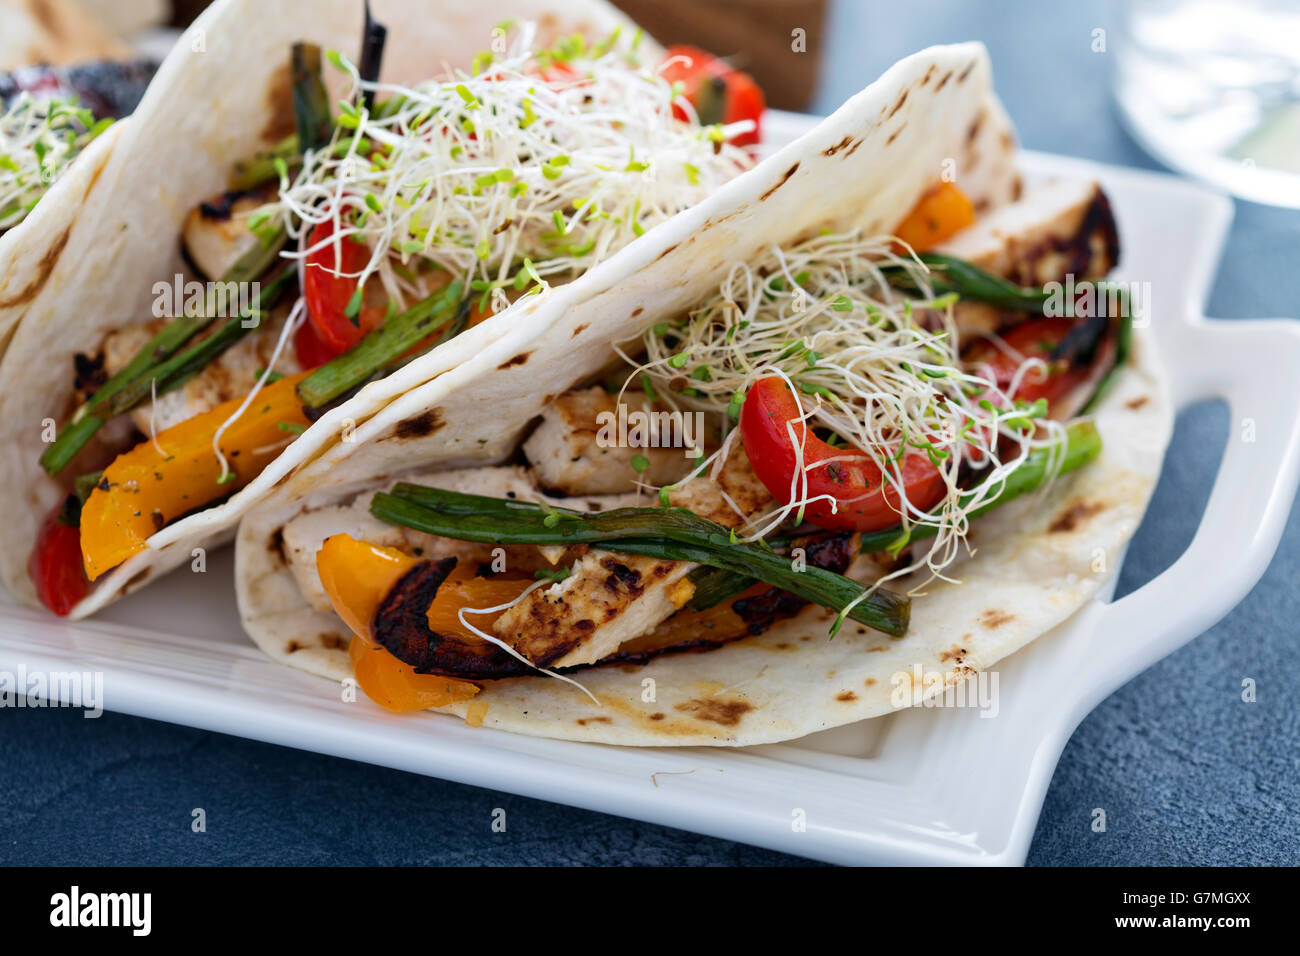 Vegan tacos with grilled tofu and vegetables Stock Photo